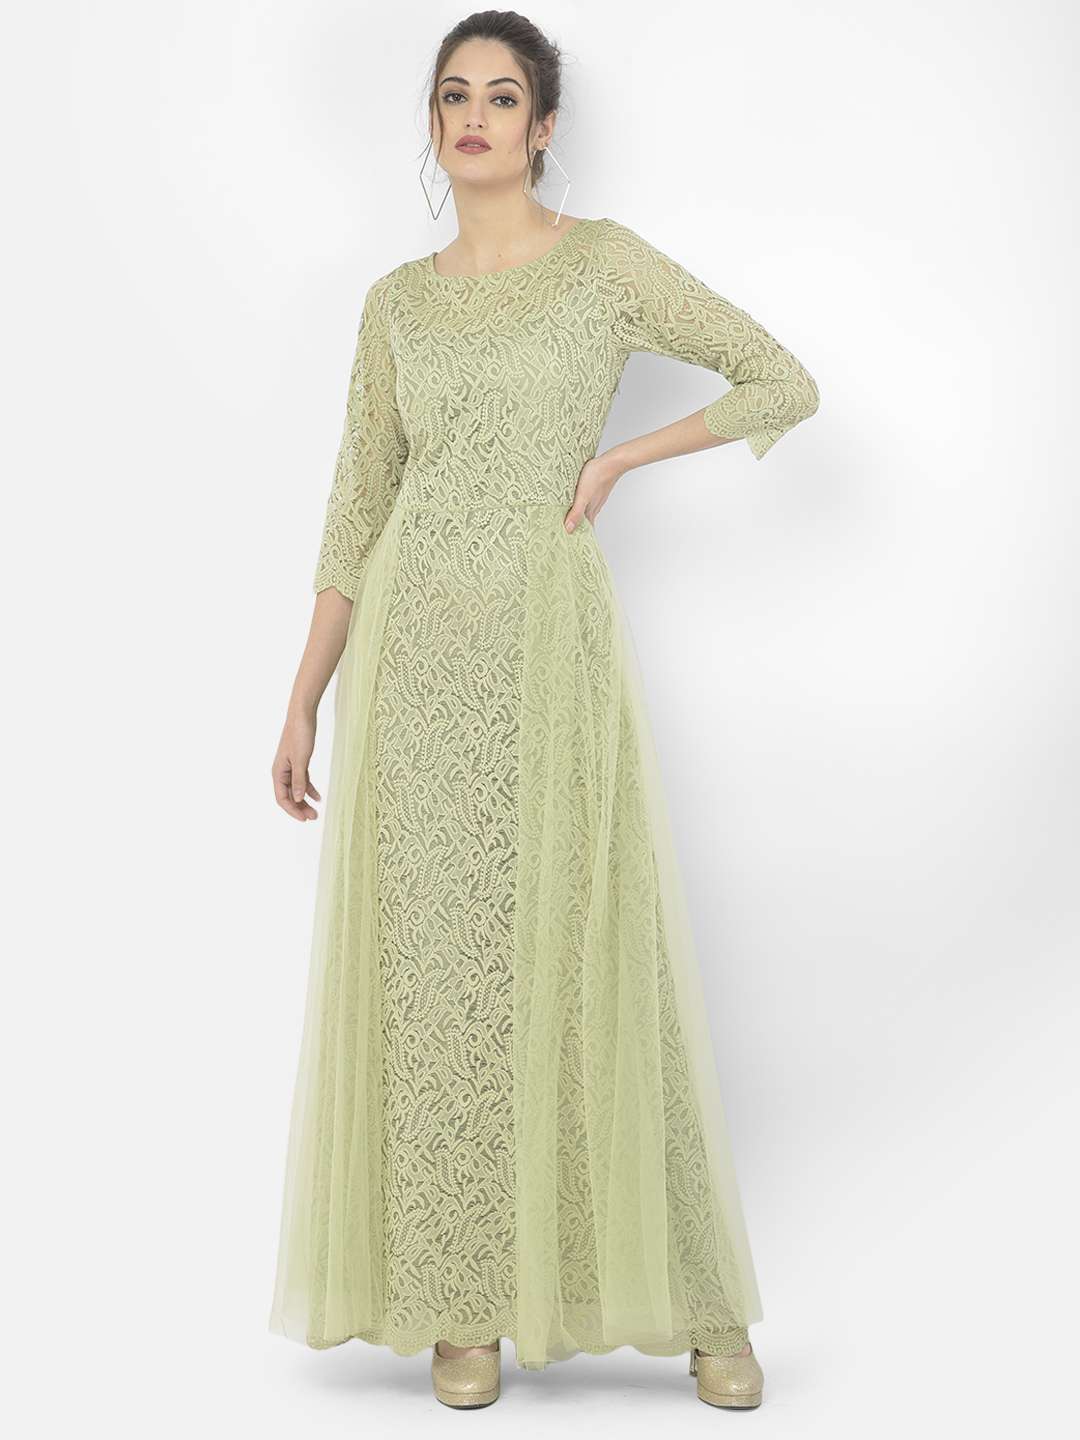 Pista Green Designer Party Wear Readymade Georgette Gown | Modest evening  dress, Gowns, Colorful dresses